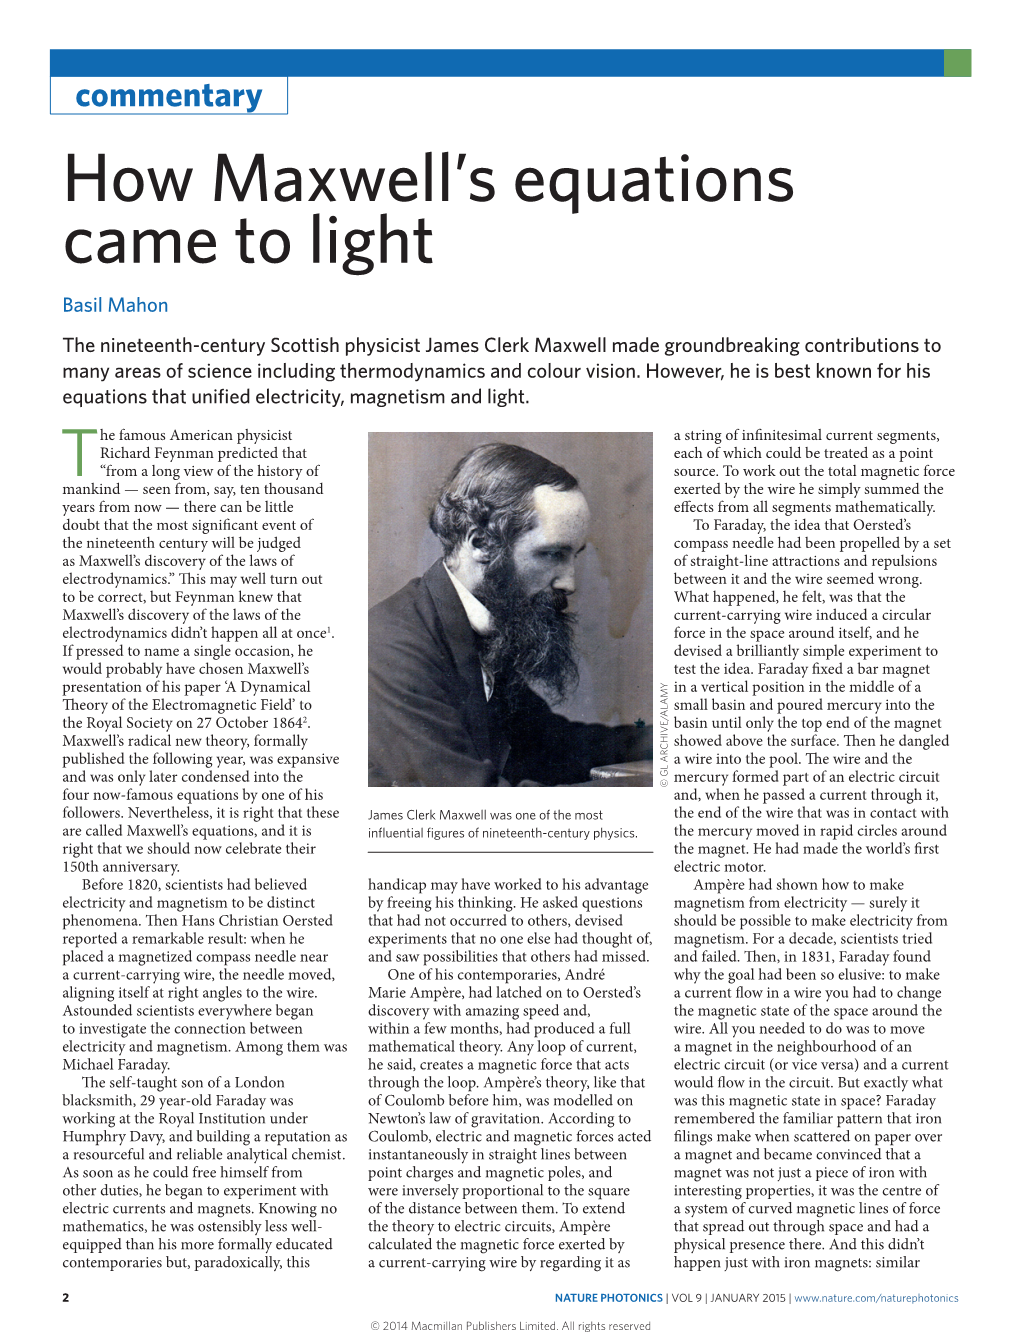 How Maxwell's Equations Came to Light